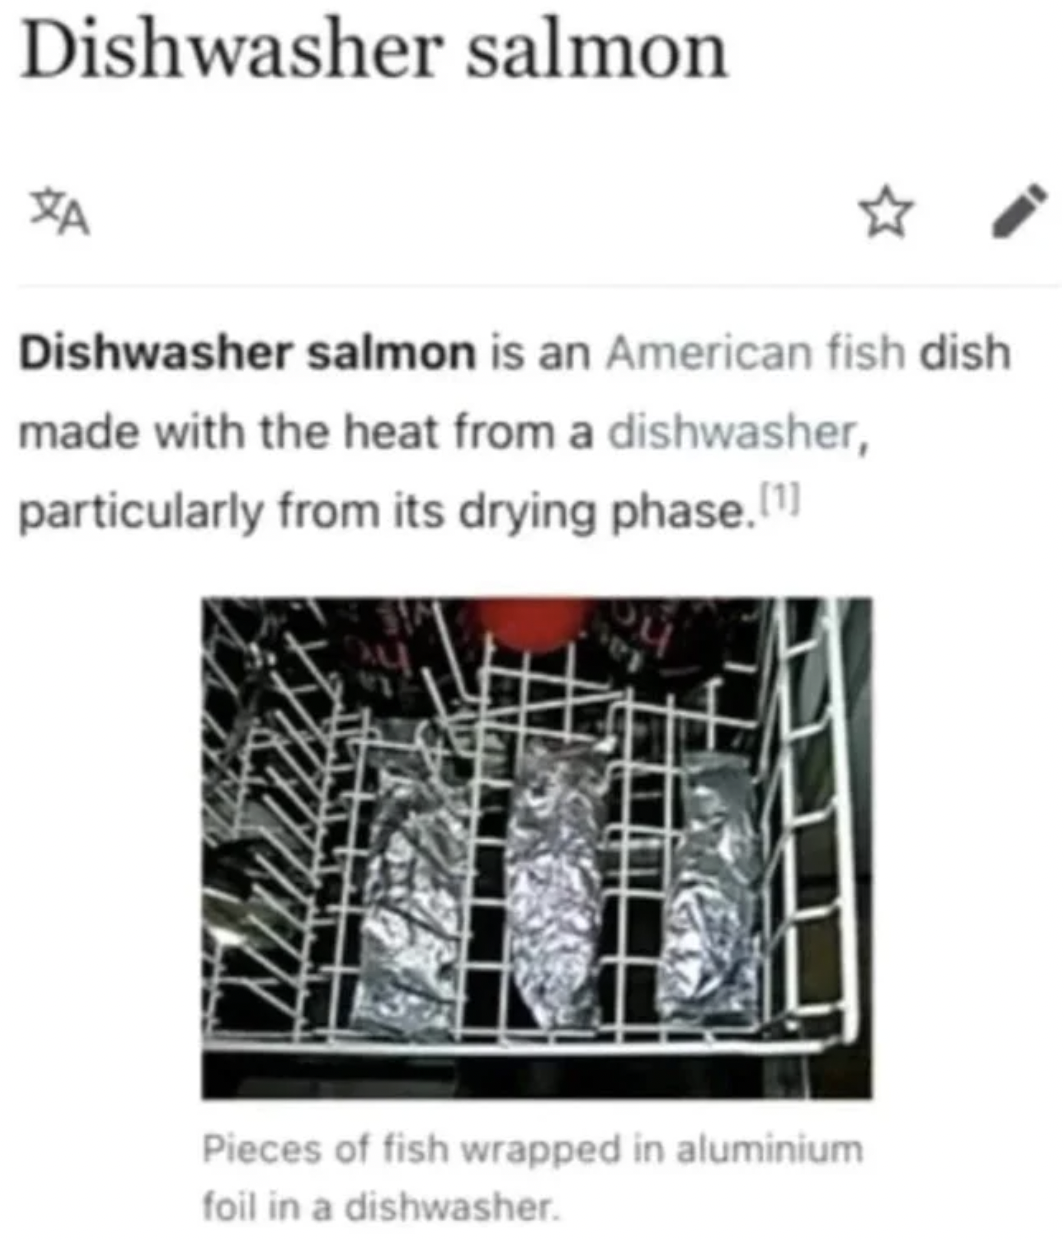 Funny facepalms - dishwasher salmon meme - Dishwasher salmon Xa Dishwasher salmon is an American fish dish made with the heat from a dishwasher, particularly from its drying phase. Pieces of fish wrapped in aluminium foil in a dishwasher.